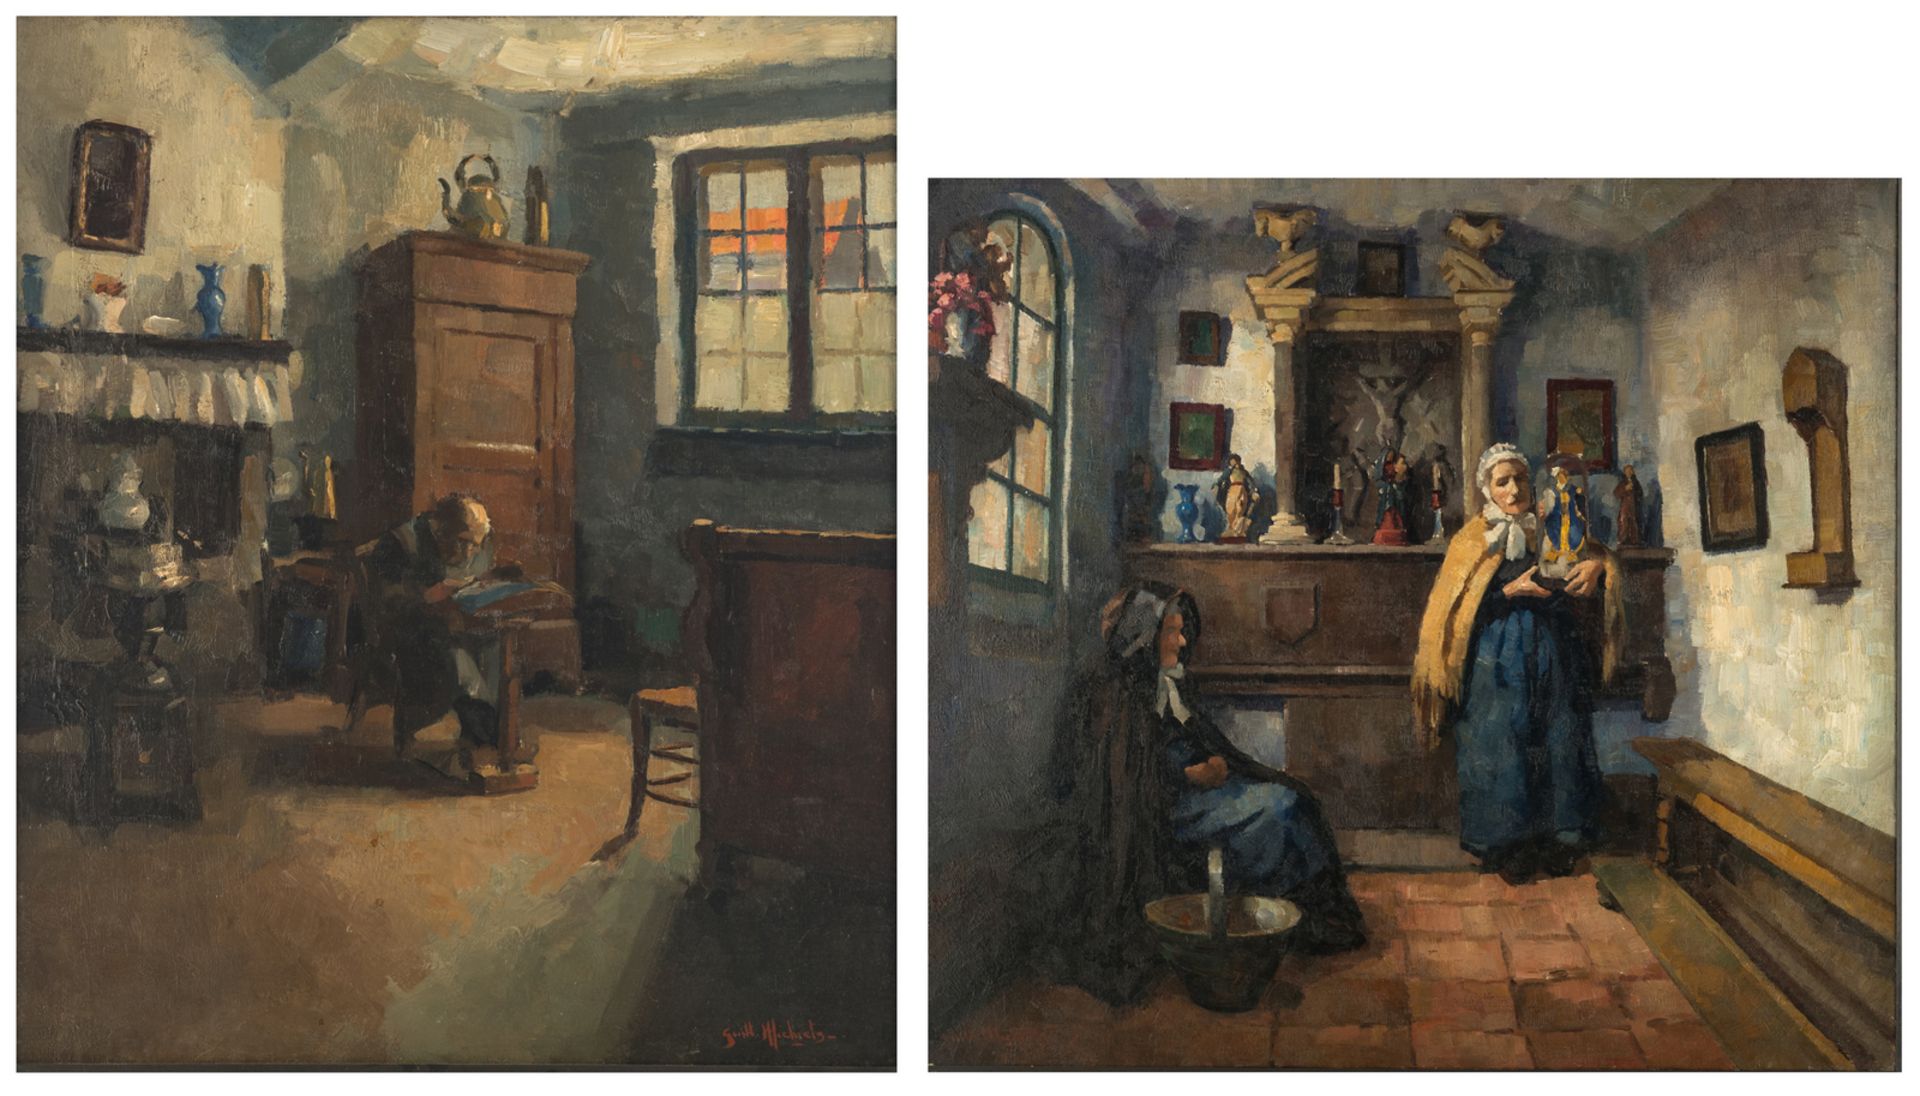 Michiels G., two devote females in the almshouse 'De Pelikaan' in Bruges, oil on canvas; added